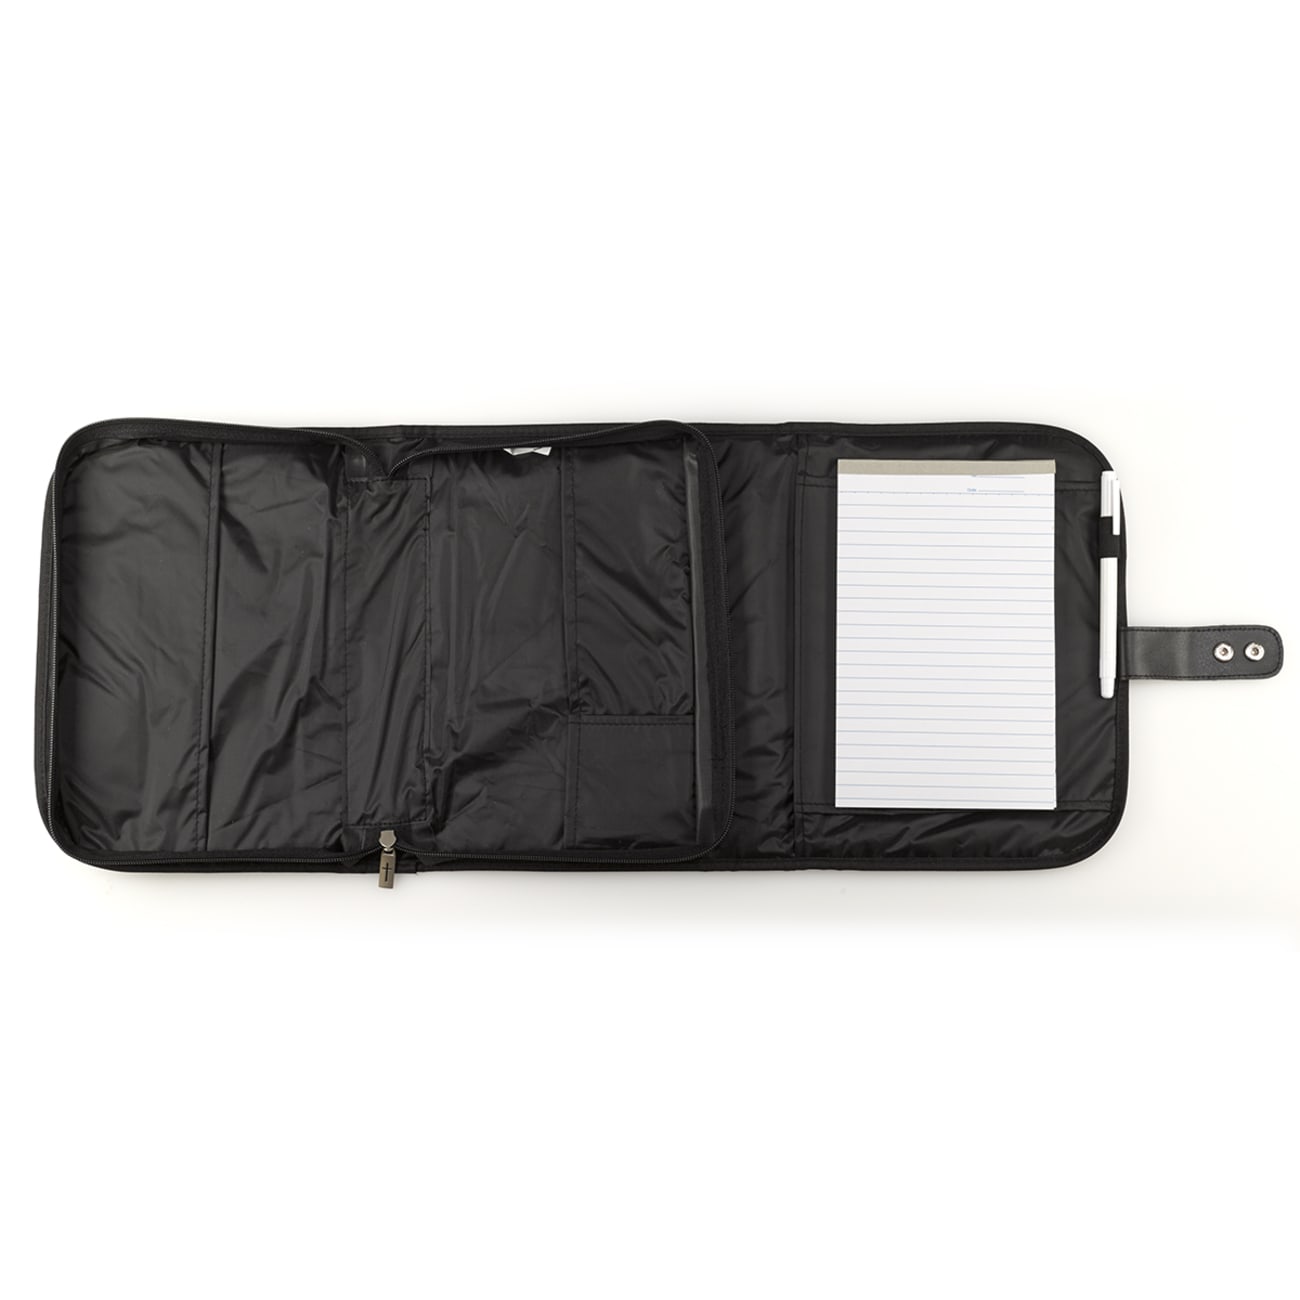 Bible Cover Tri-Fold Organizer Large: Black Polyester Bible Cover